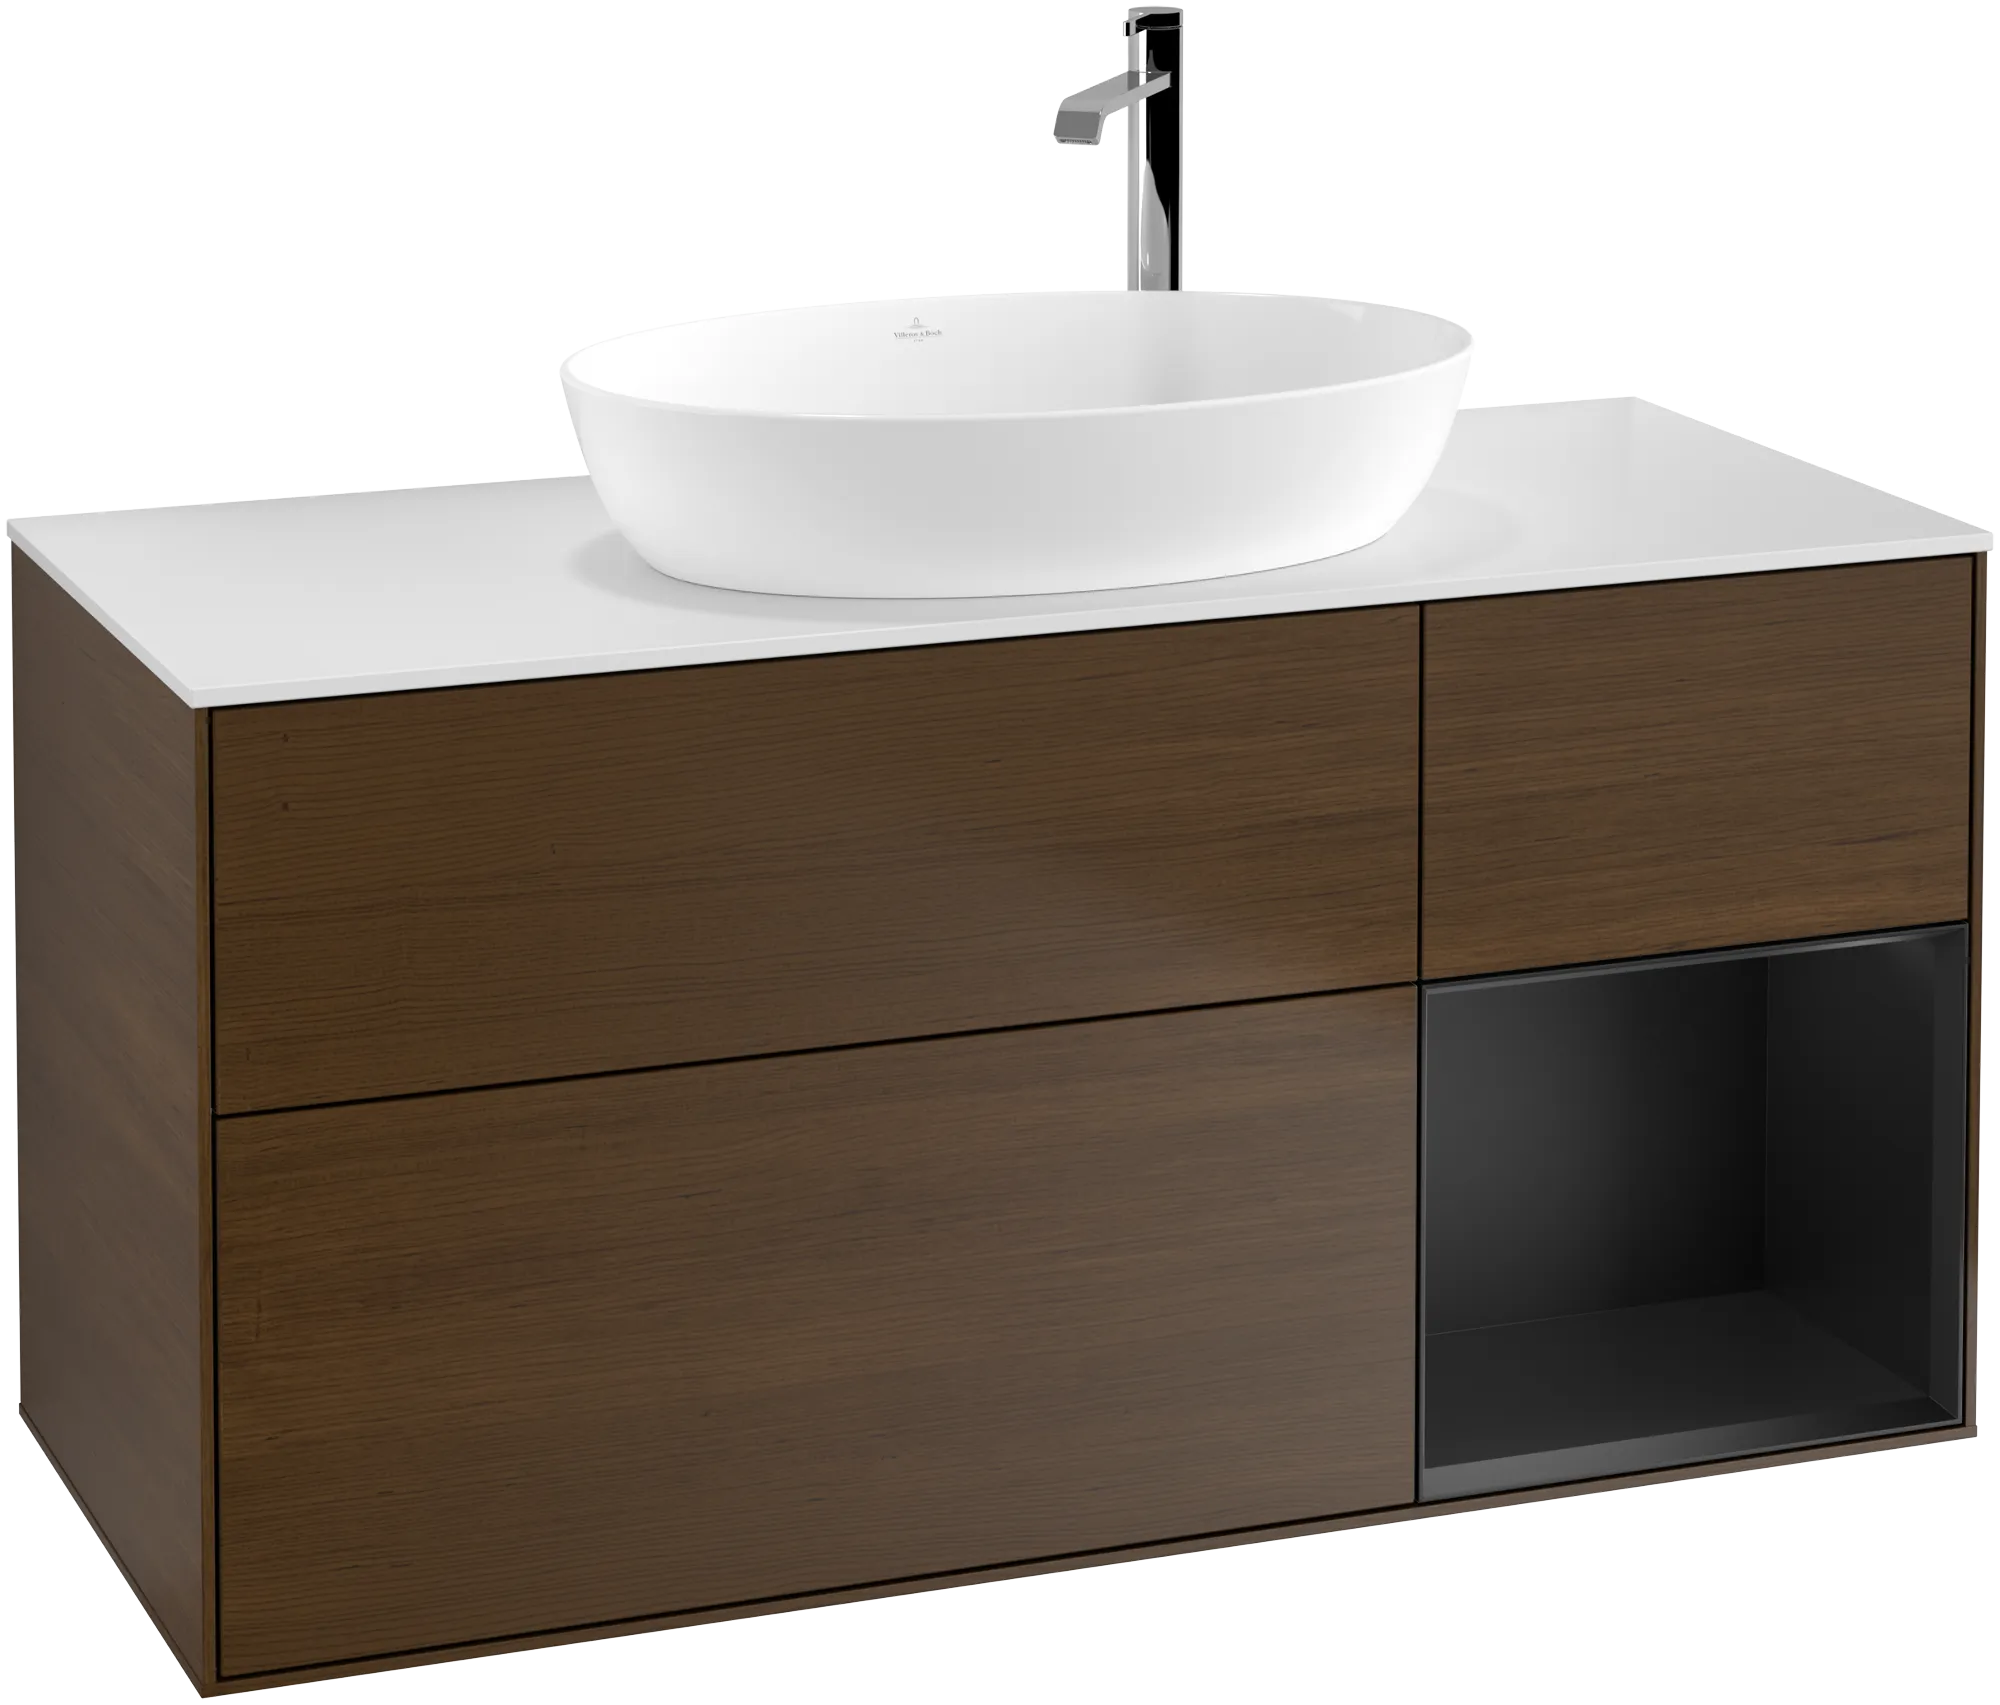 Picture of VILLEROY BOCH Finion Vanity unit, with lighting, 3 pull-out compartments, 1200 x 603 x 501 mm, Walnut Veneer / Black Matt Lacquer / Glass White Matt #G951PDGN